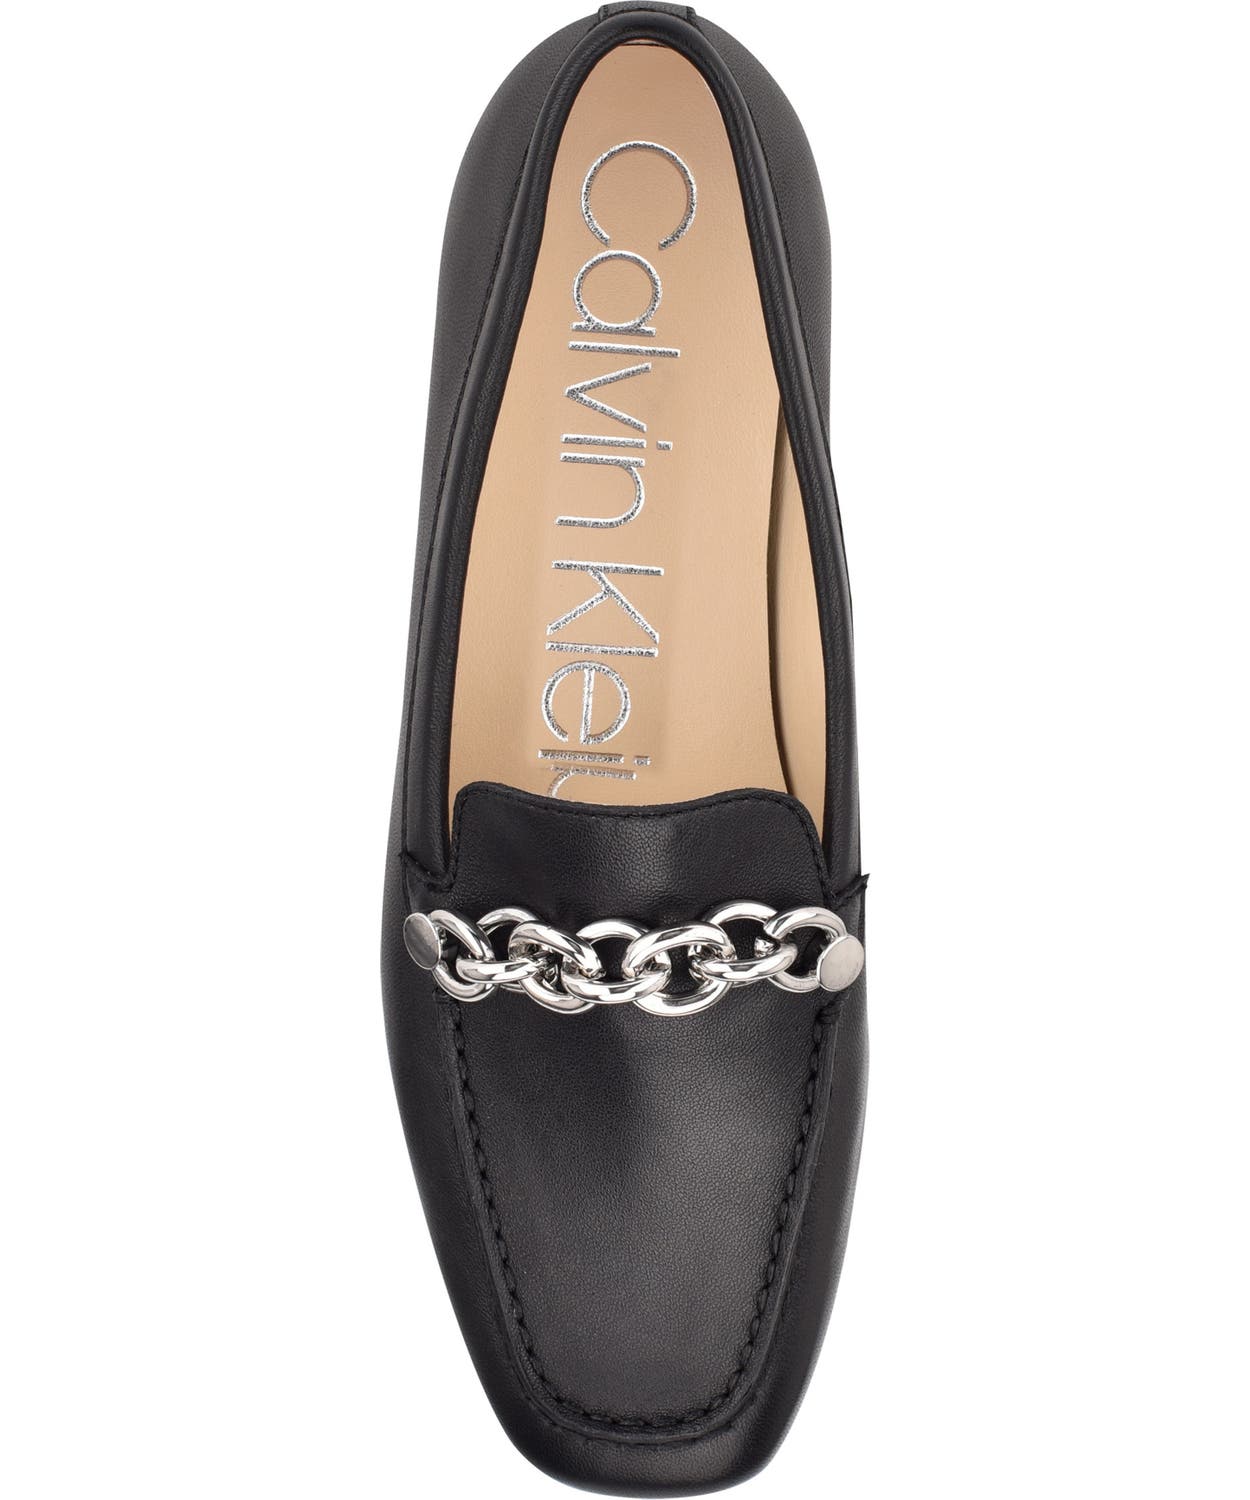 Calvin Klein Women's Black Leather Elanna Chain Link Loafers - COUTUREPOINT